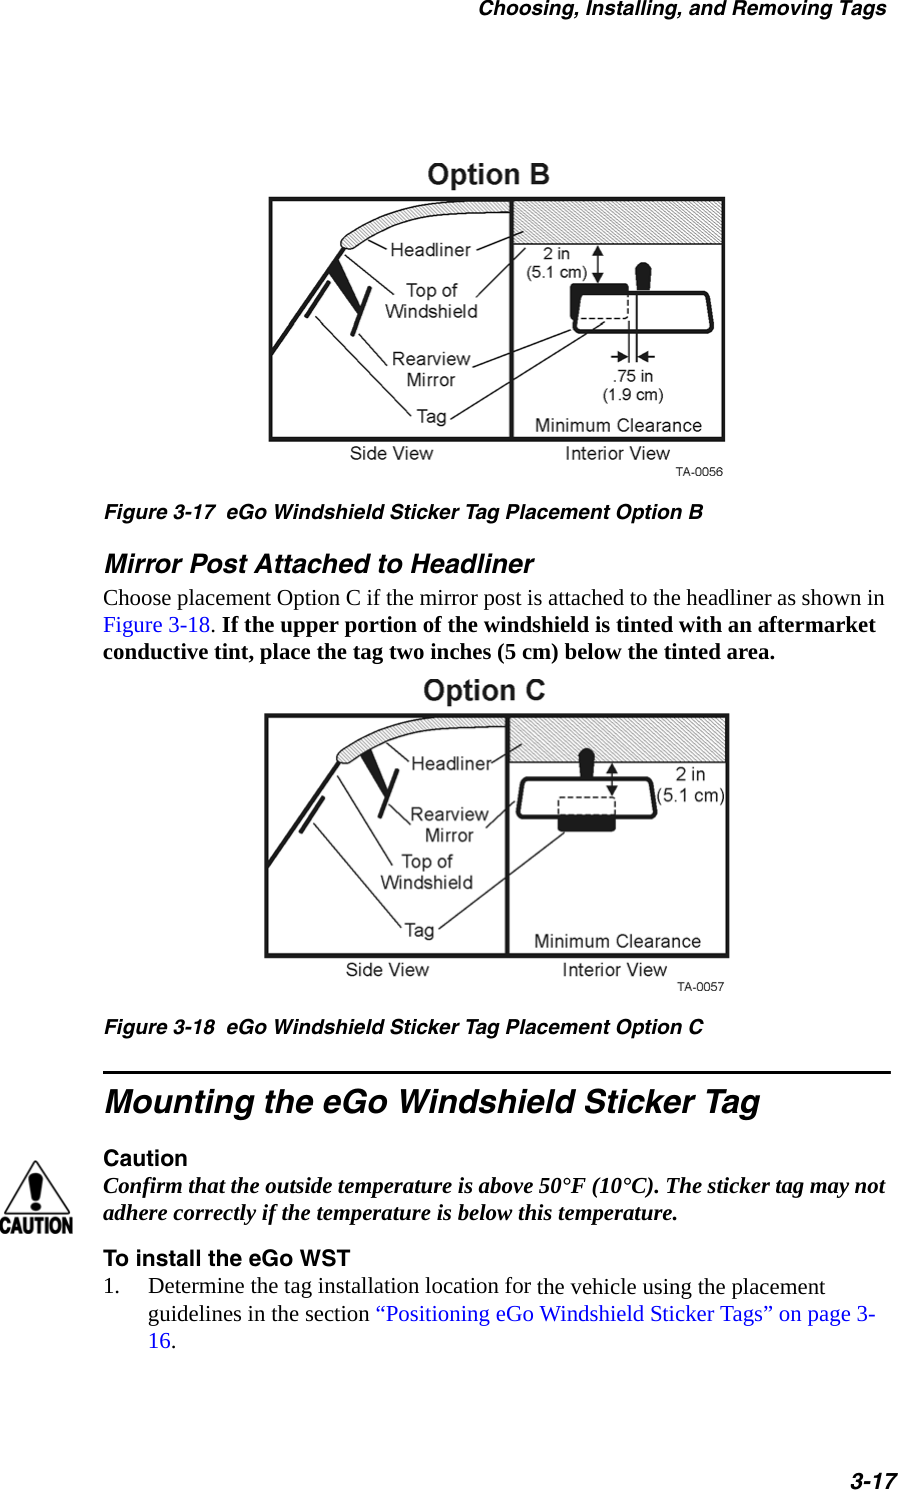 Choosing, Installing, and Removing Tags3-17Figure 3-17  eGo Windshield Sticker Tag Placement Option BMirror Post Attached to HeadlinerChoose placement Option C if the mirror post is attached to the headliner as shown in Figure 3-18. If the upper portion of the windshield is tinted with an aftermarket conductive tint, place the tag two inches (5 cm) below the tinted area. Figure 3-18  eGo Windshield Sticker Tag Placement Option CMounting the eGo Windshield Sticker TagCautionConfirm that the outside temperature is above 50°F (10°C). The sticker tag may not adhere correctly if the temperature is below this temperature.To install the eGo WST1. Determine the tag installation location for the vehicle using the placement guidelines in the section “Positioning eGo Windshield Sticker Tags” on page 3-16.